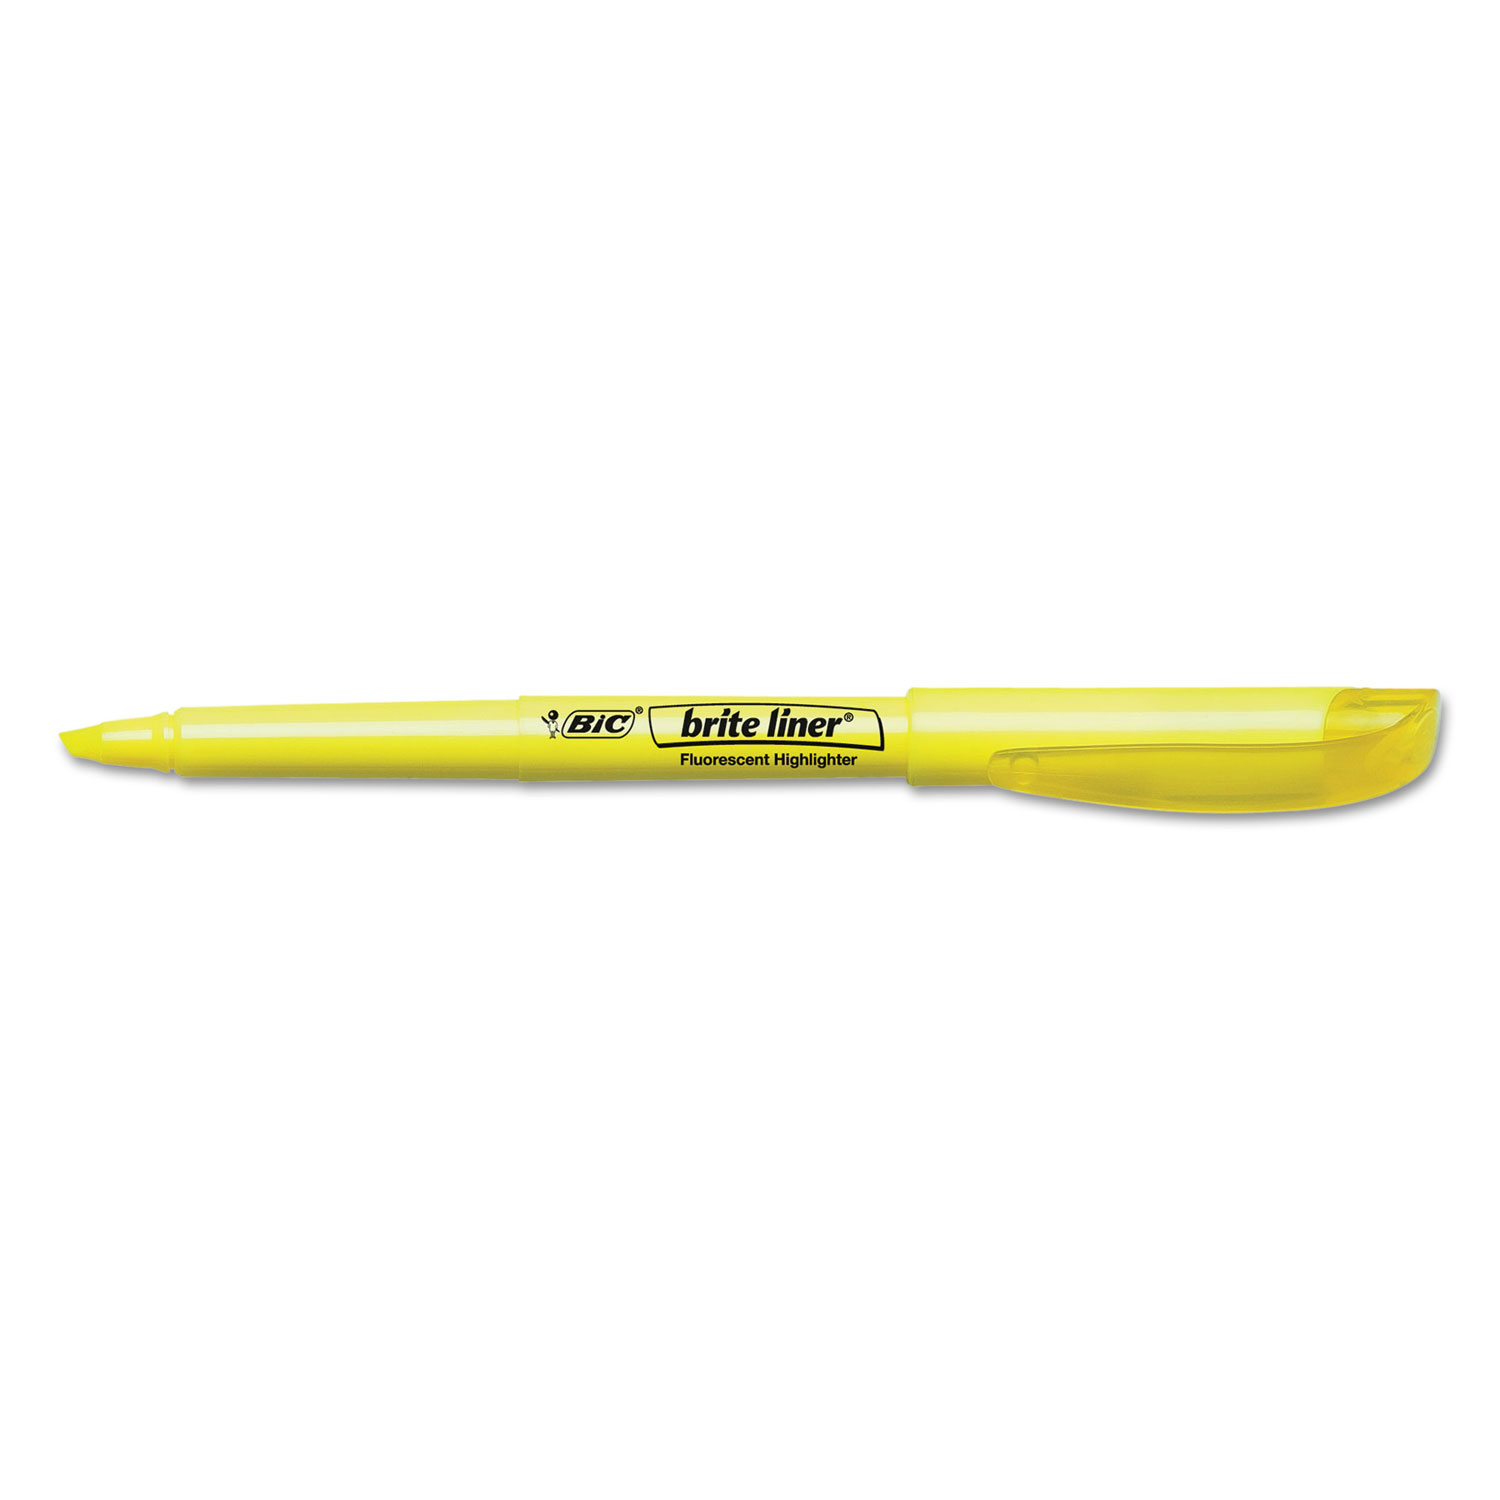 Brite Liner Highlighter, Chisel Tip, Yellow, 24/Pack